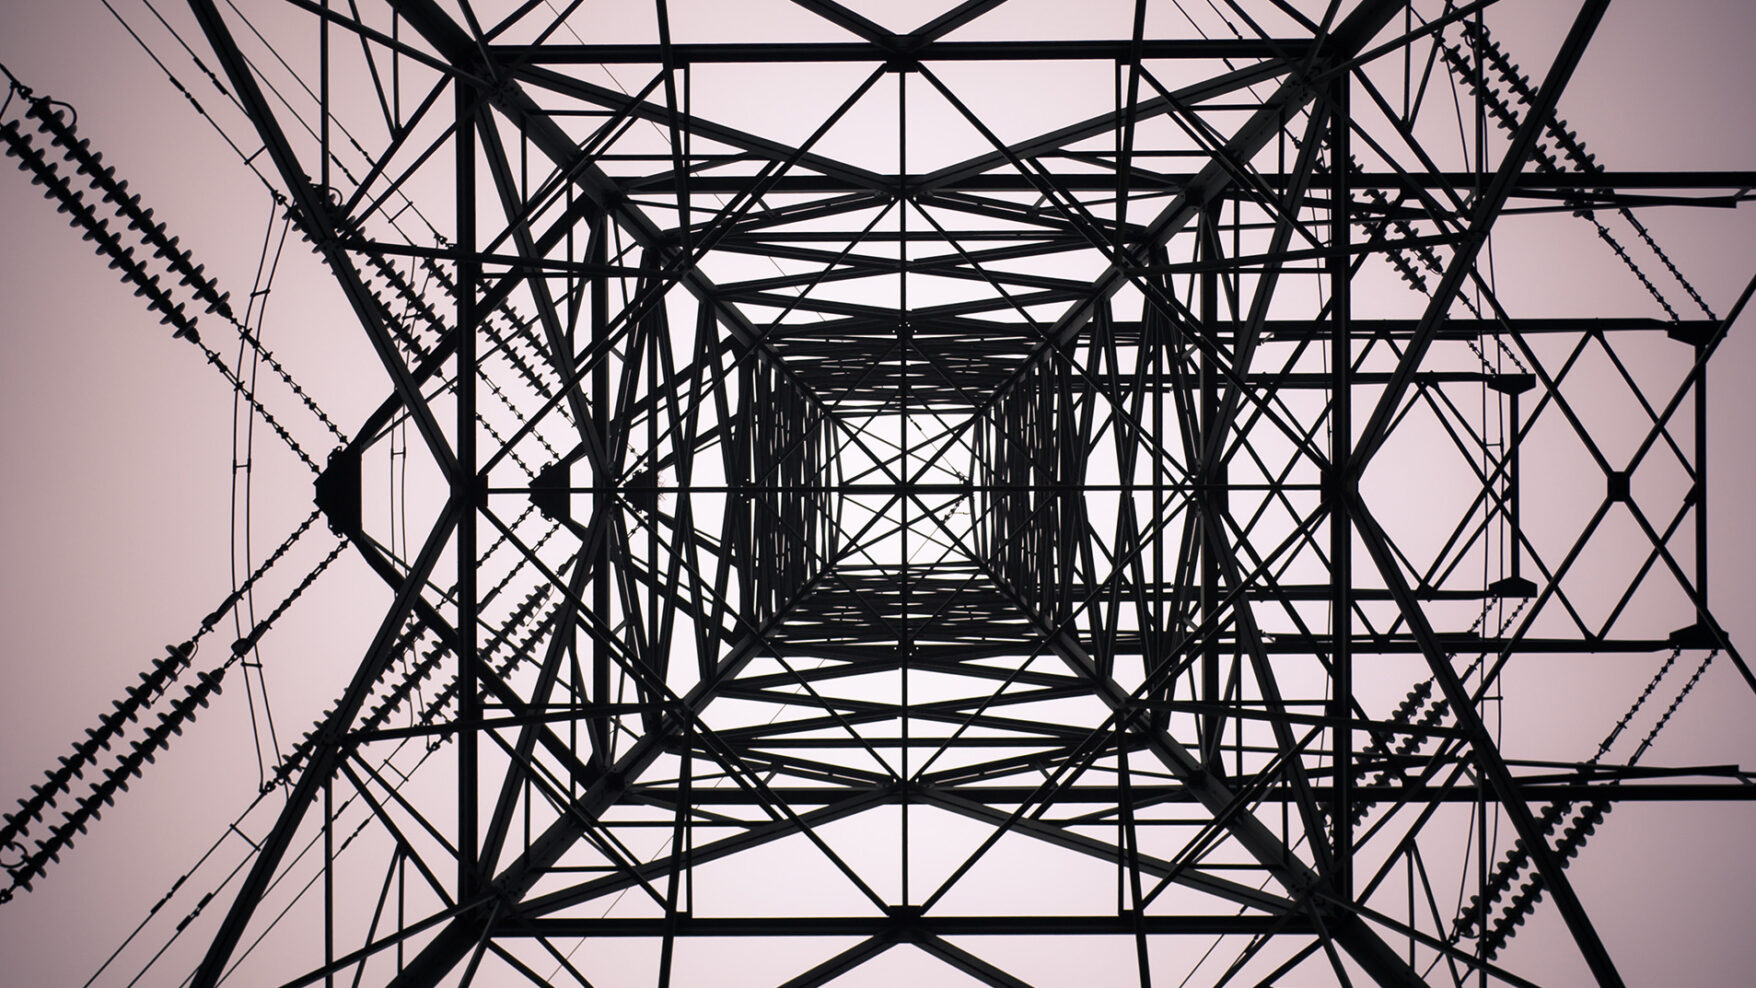 Abstract photograph taken from the ground looking directly up into electrical infrastructure. Dark lines of cables and metal contrast with the light sky.